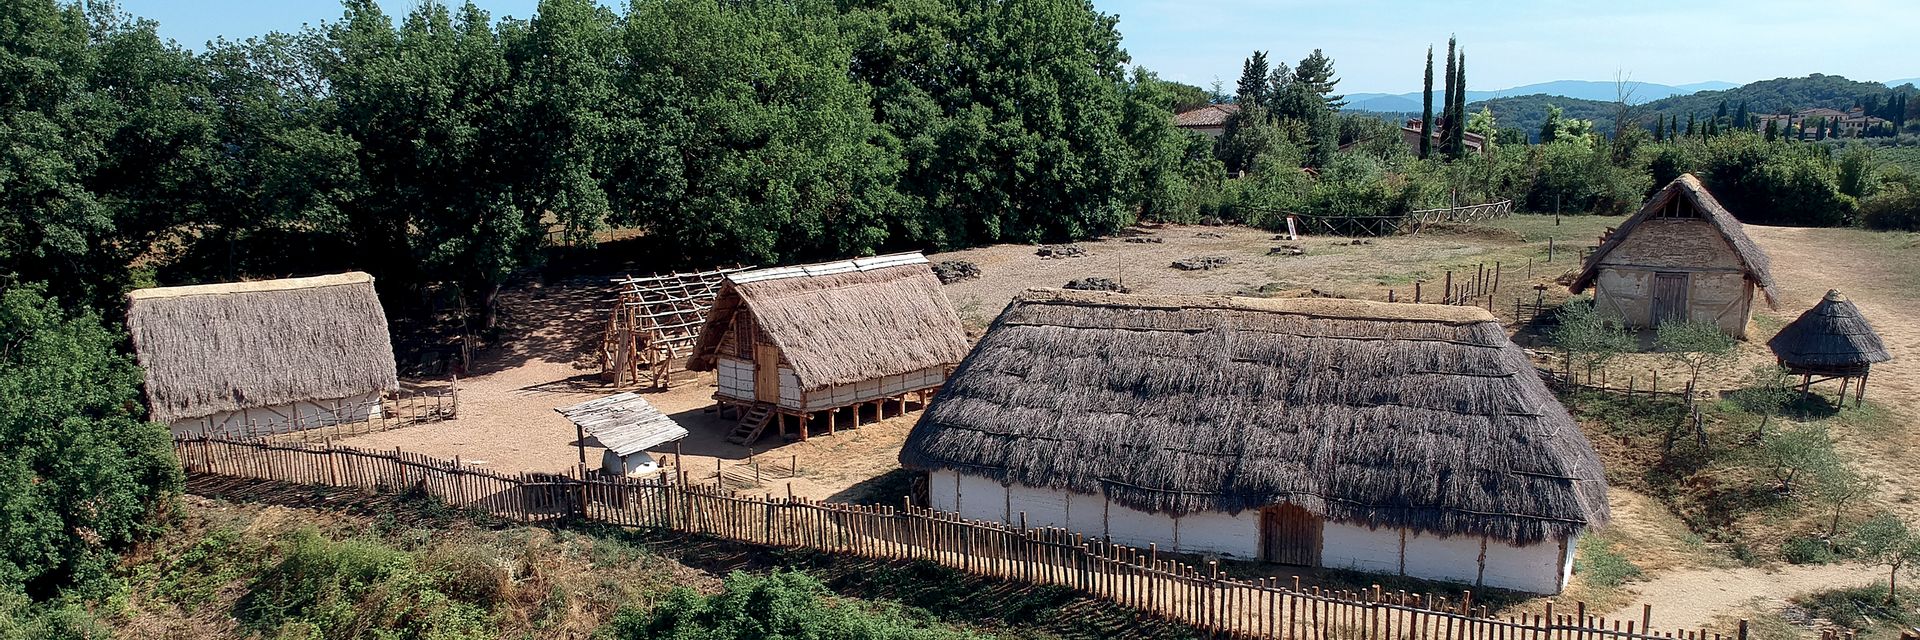 Archeodrome and Archaeological Park of Poggio Imperiale